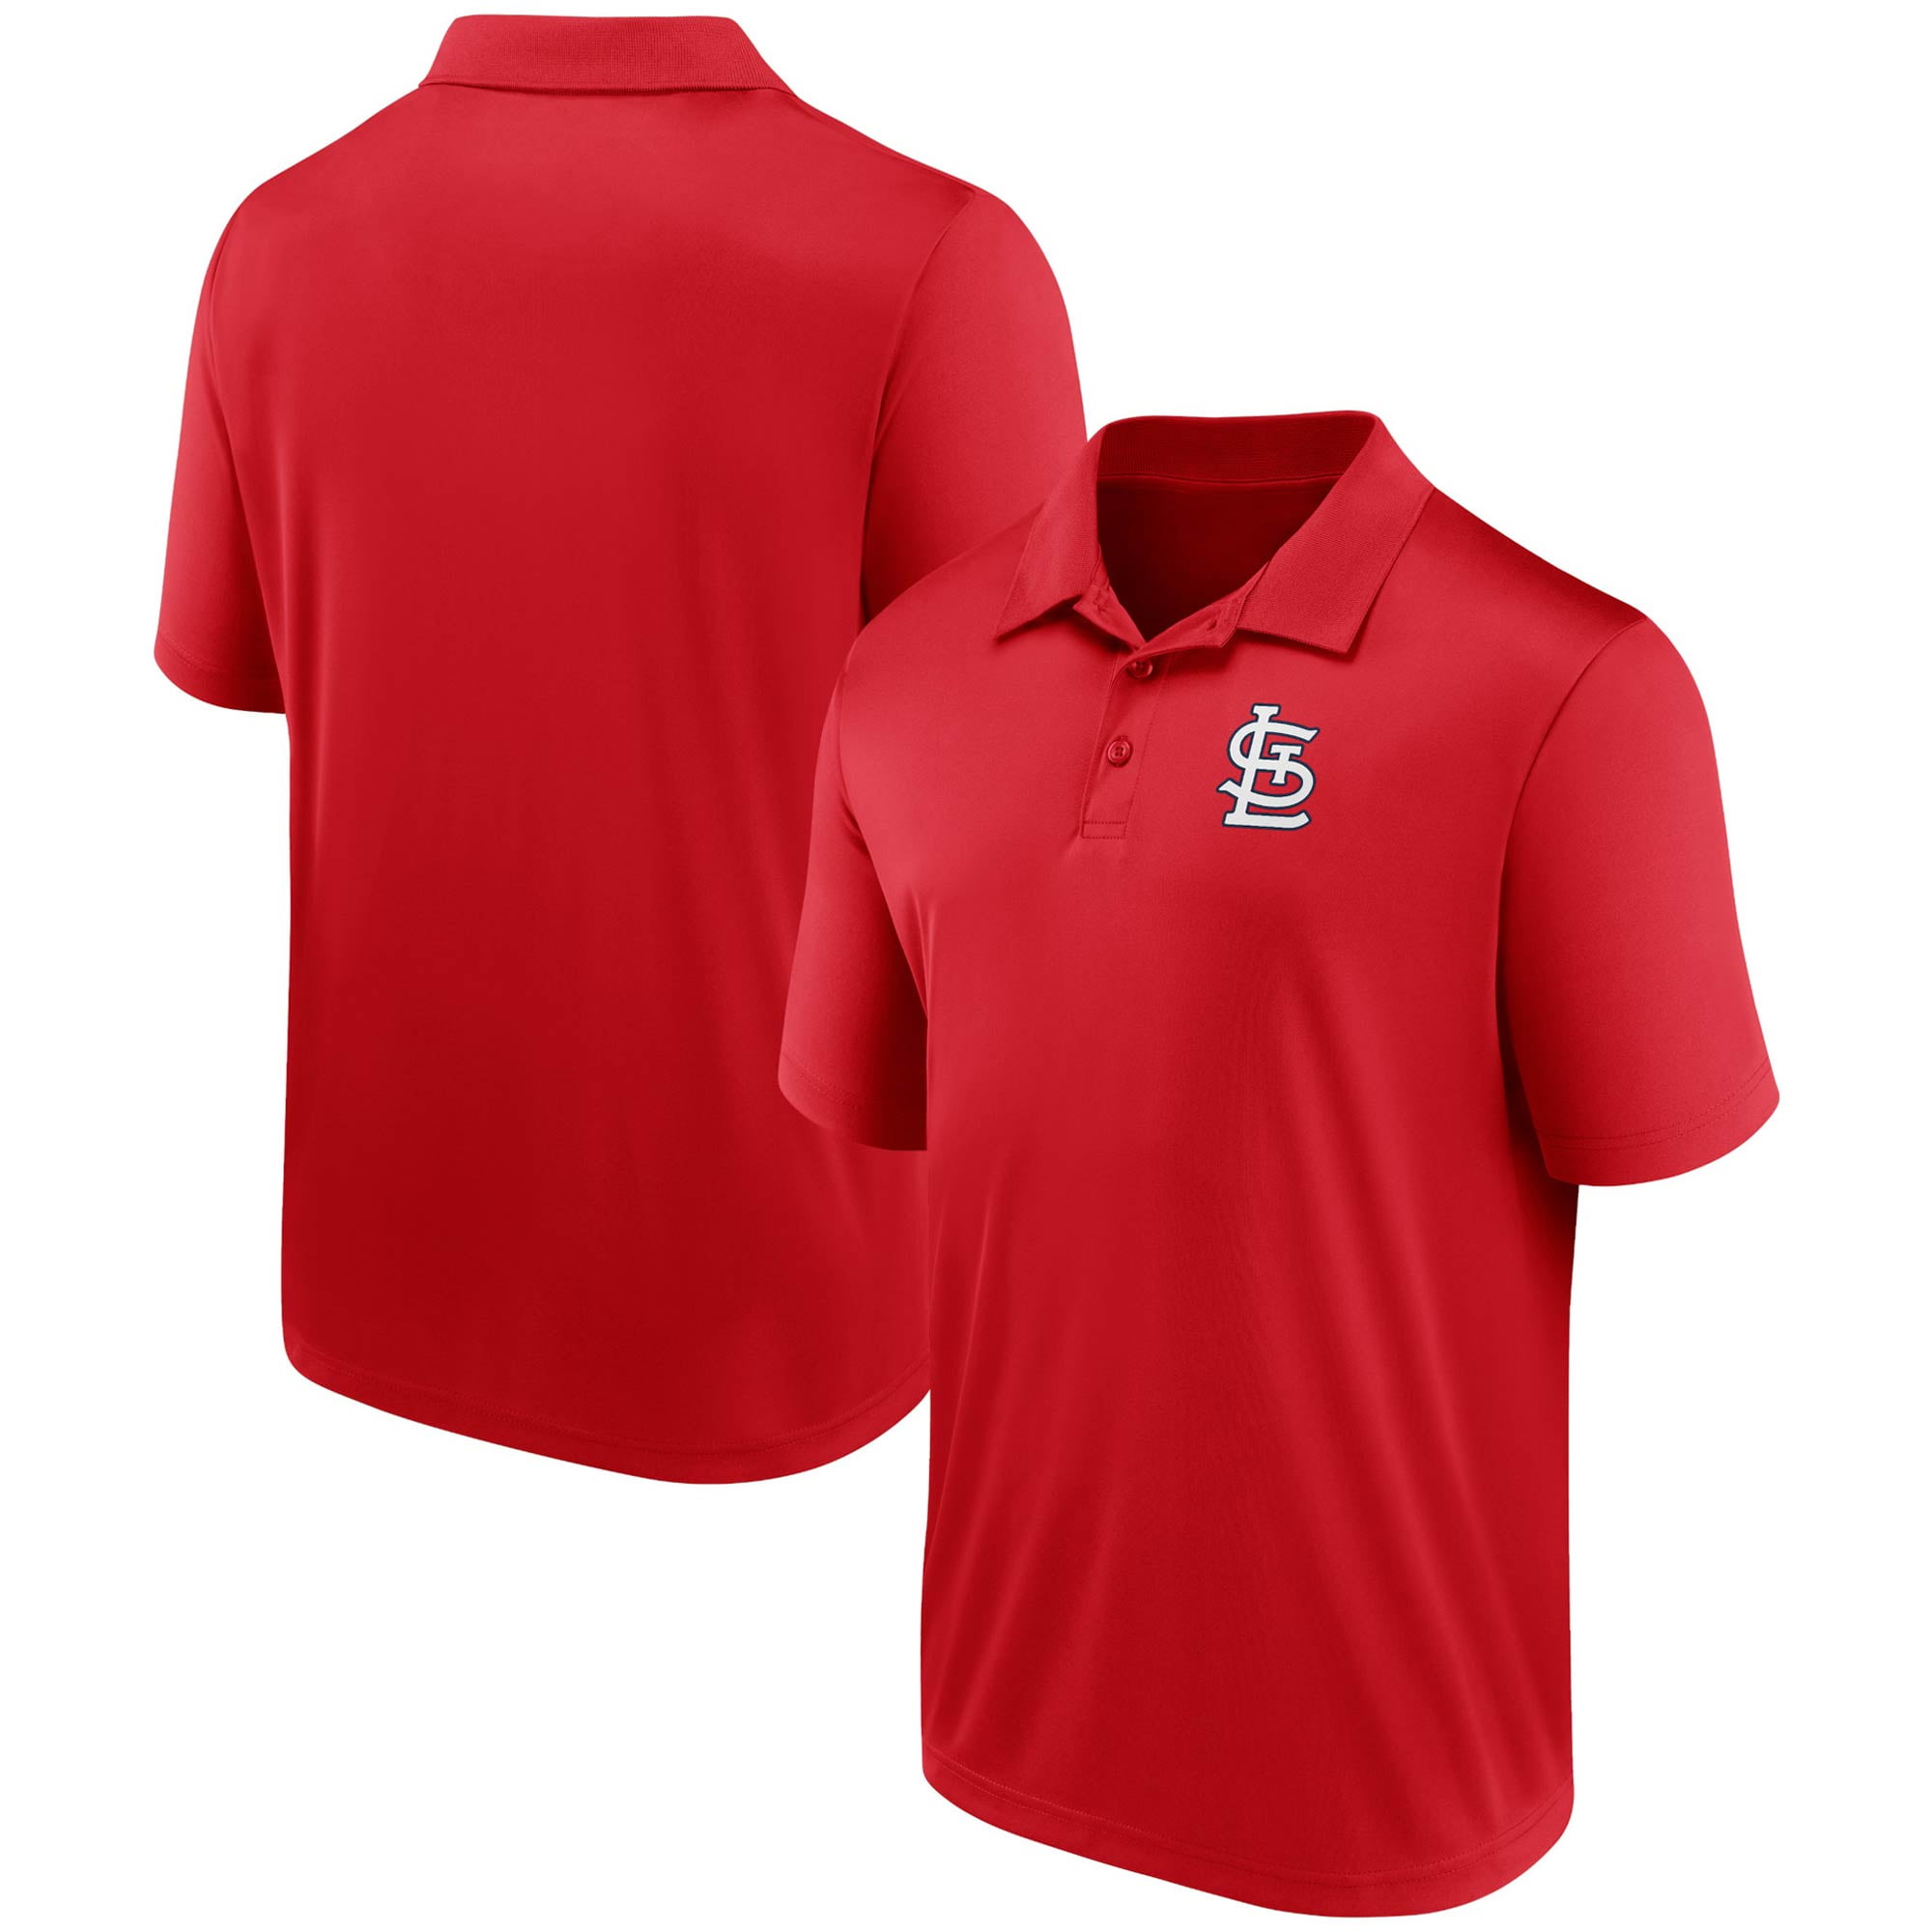 Men's Fanatics Branded Red St. Louis Cardinals Primary Logo Polo Shirt 